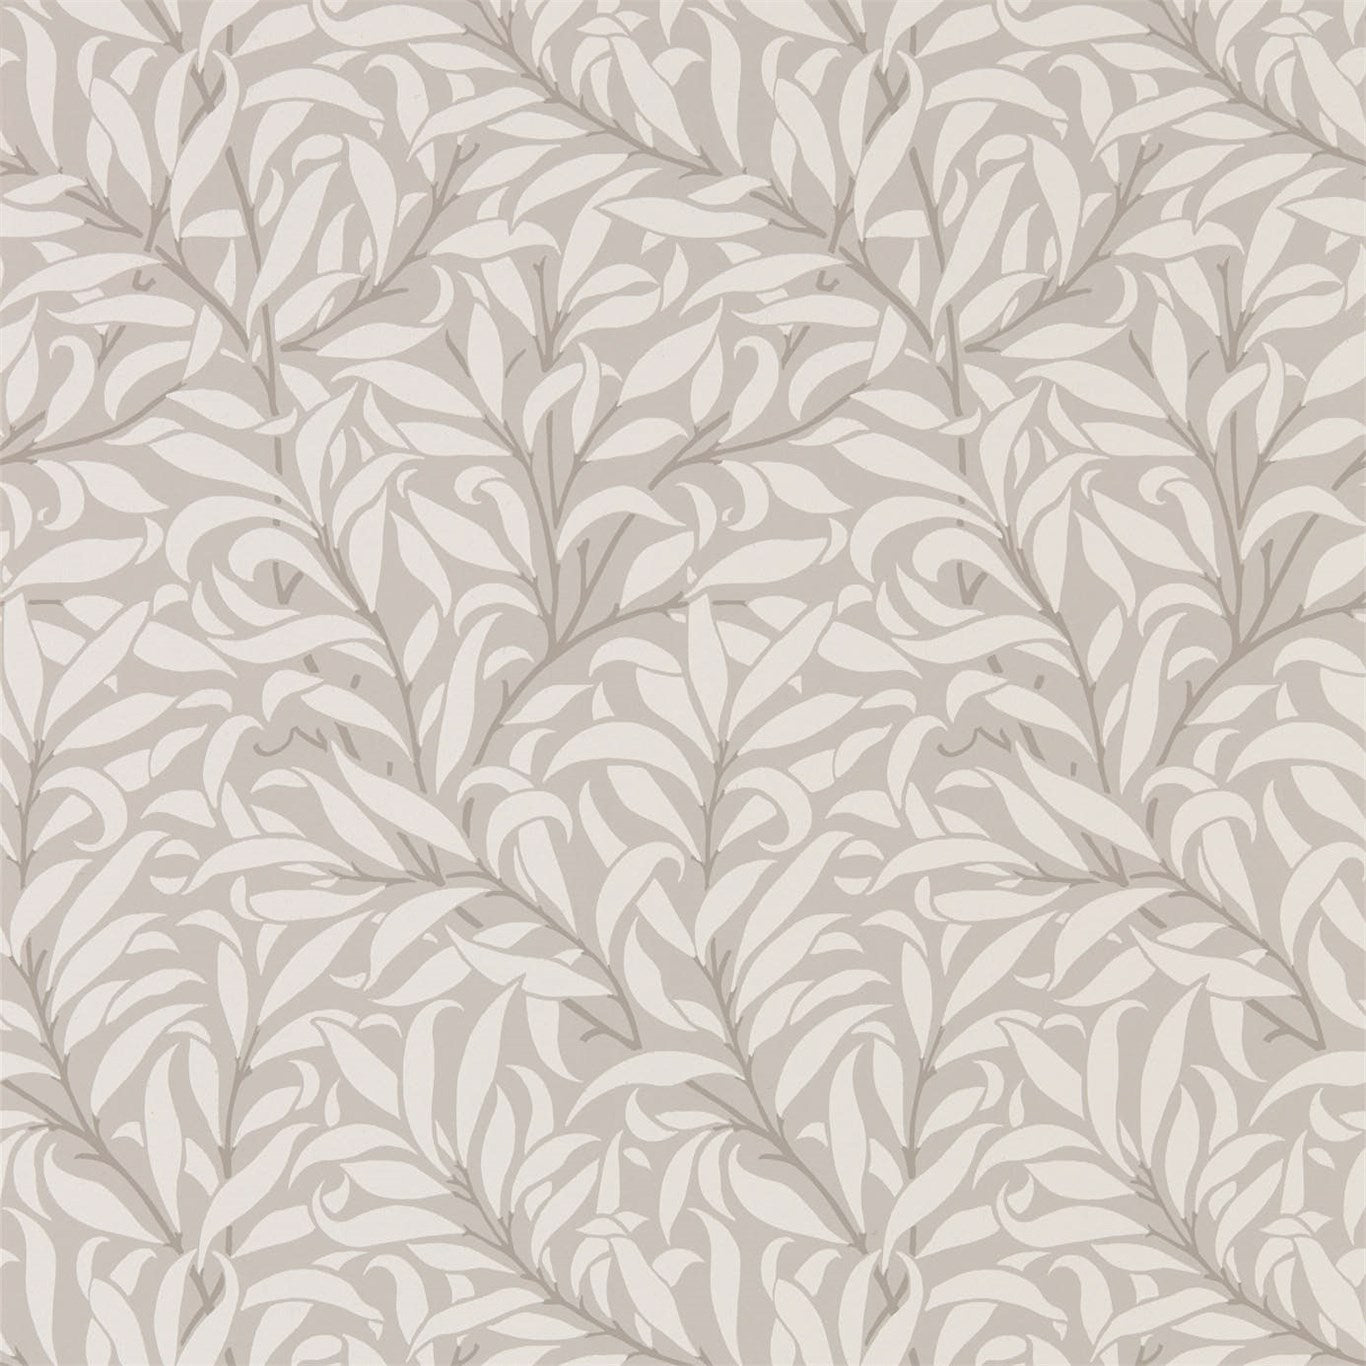 Pure Willow Bough Wallpaper DMPU216025 by Morris & Co